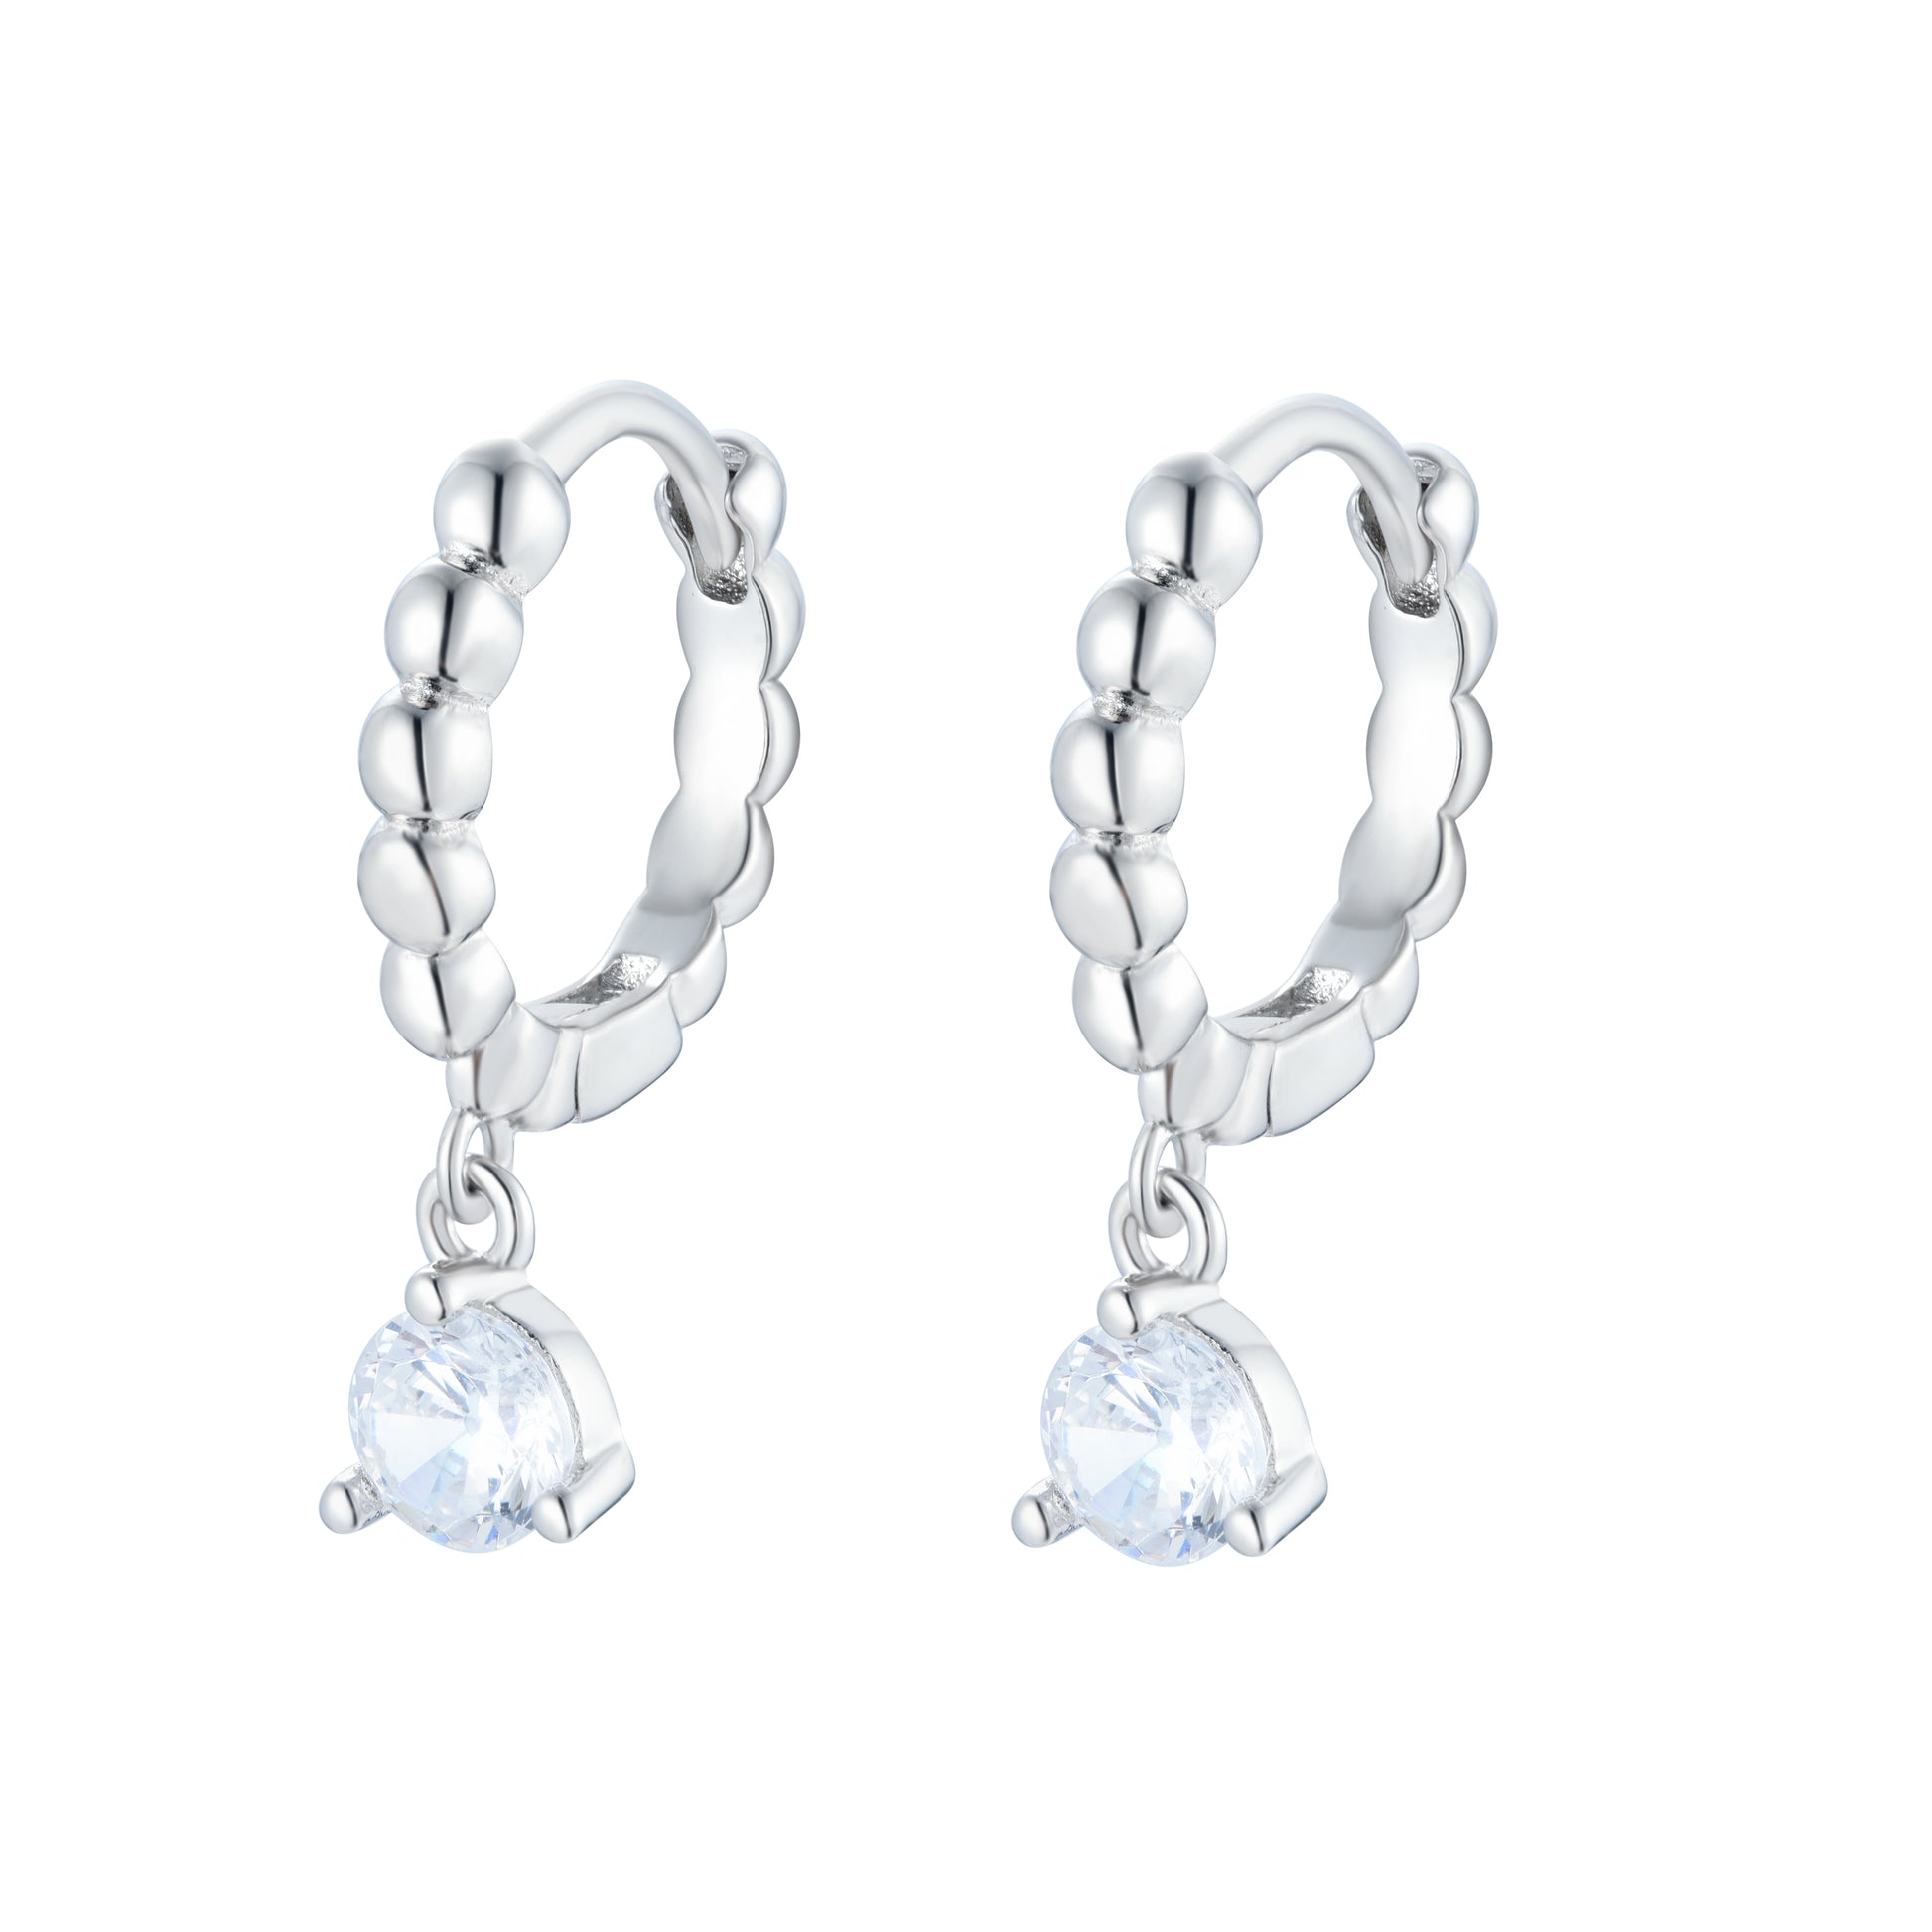 
Sterling silver 12mm decorative hoop earrings with a white Cubic Zirconia drop design.

